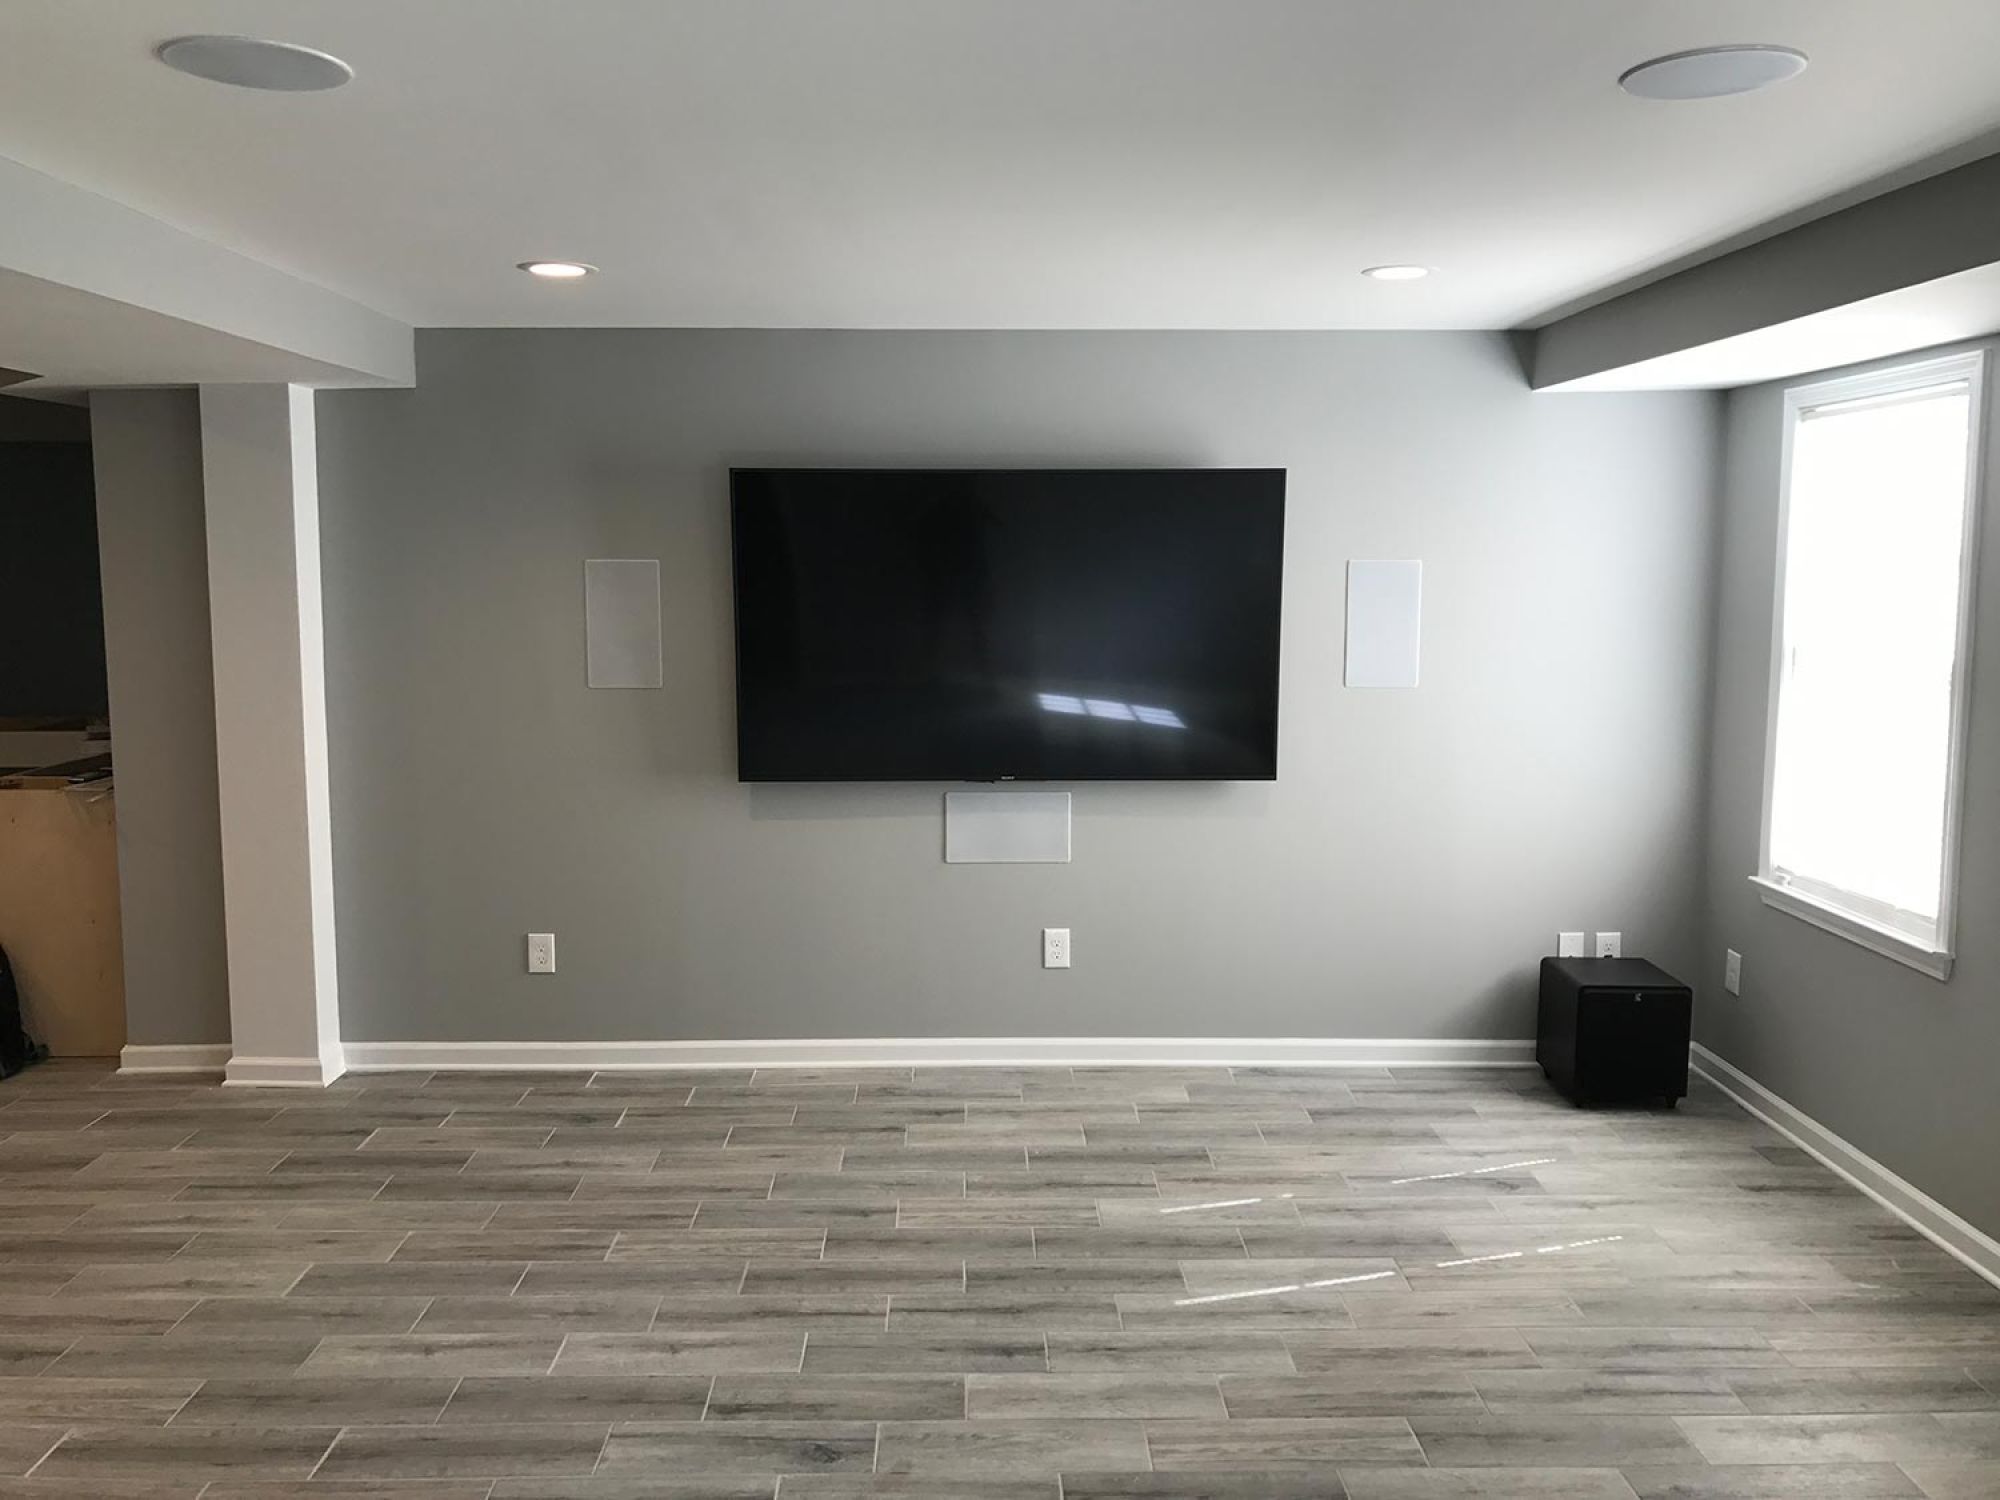 In-wall speakers with TV